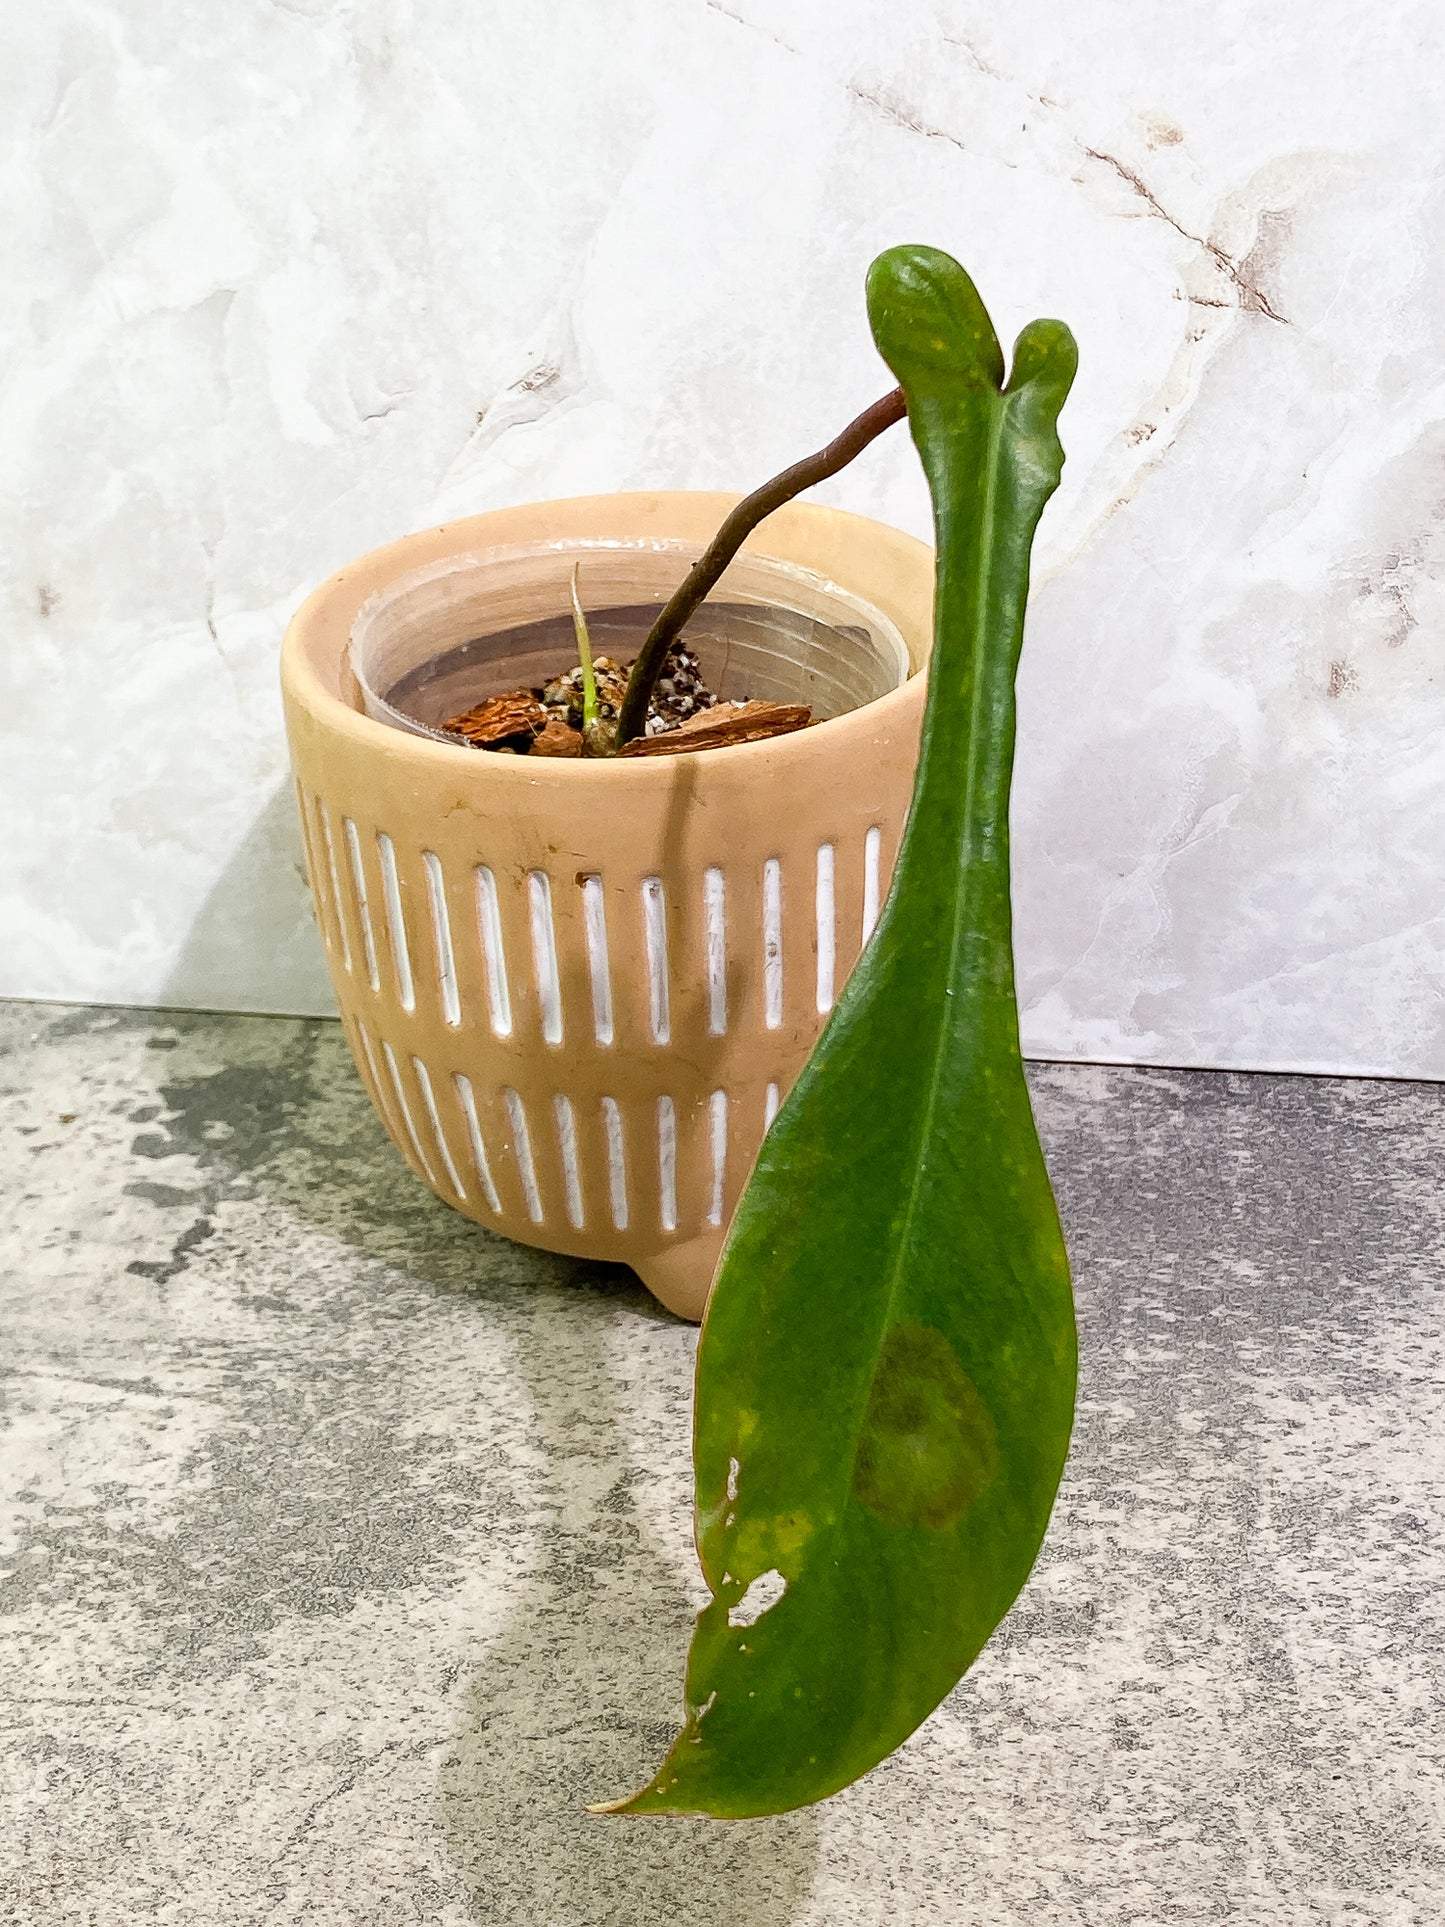 Philodendron Joepii 1 leaf 1 sprout rooted